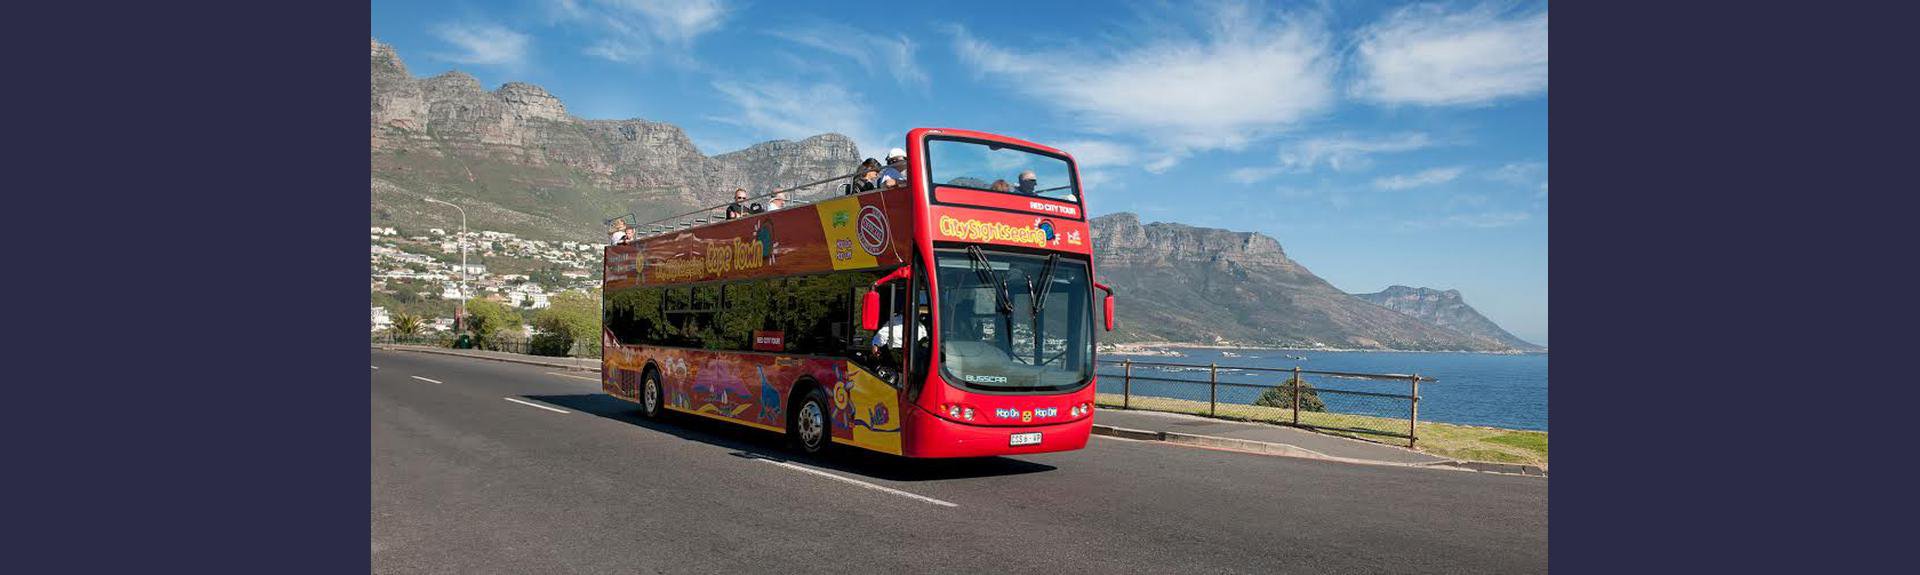 Spoil your mom with City Sightseeing specials this Mother’s Day 